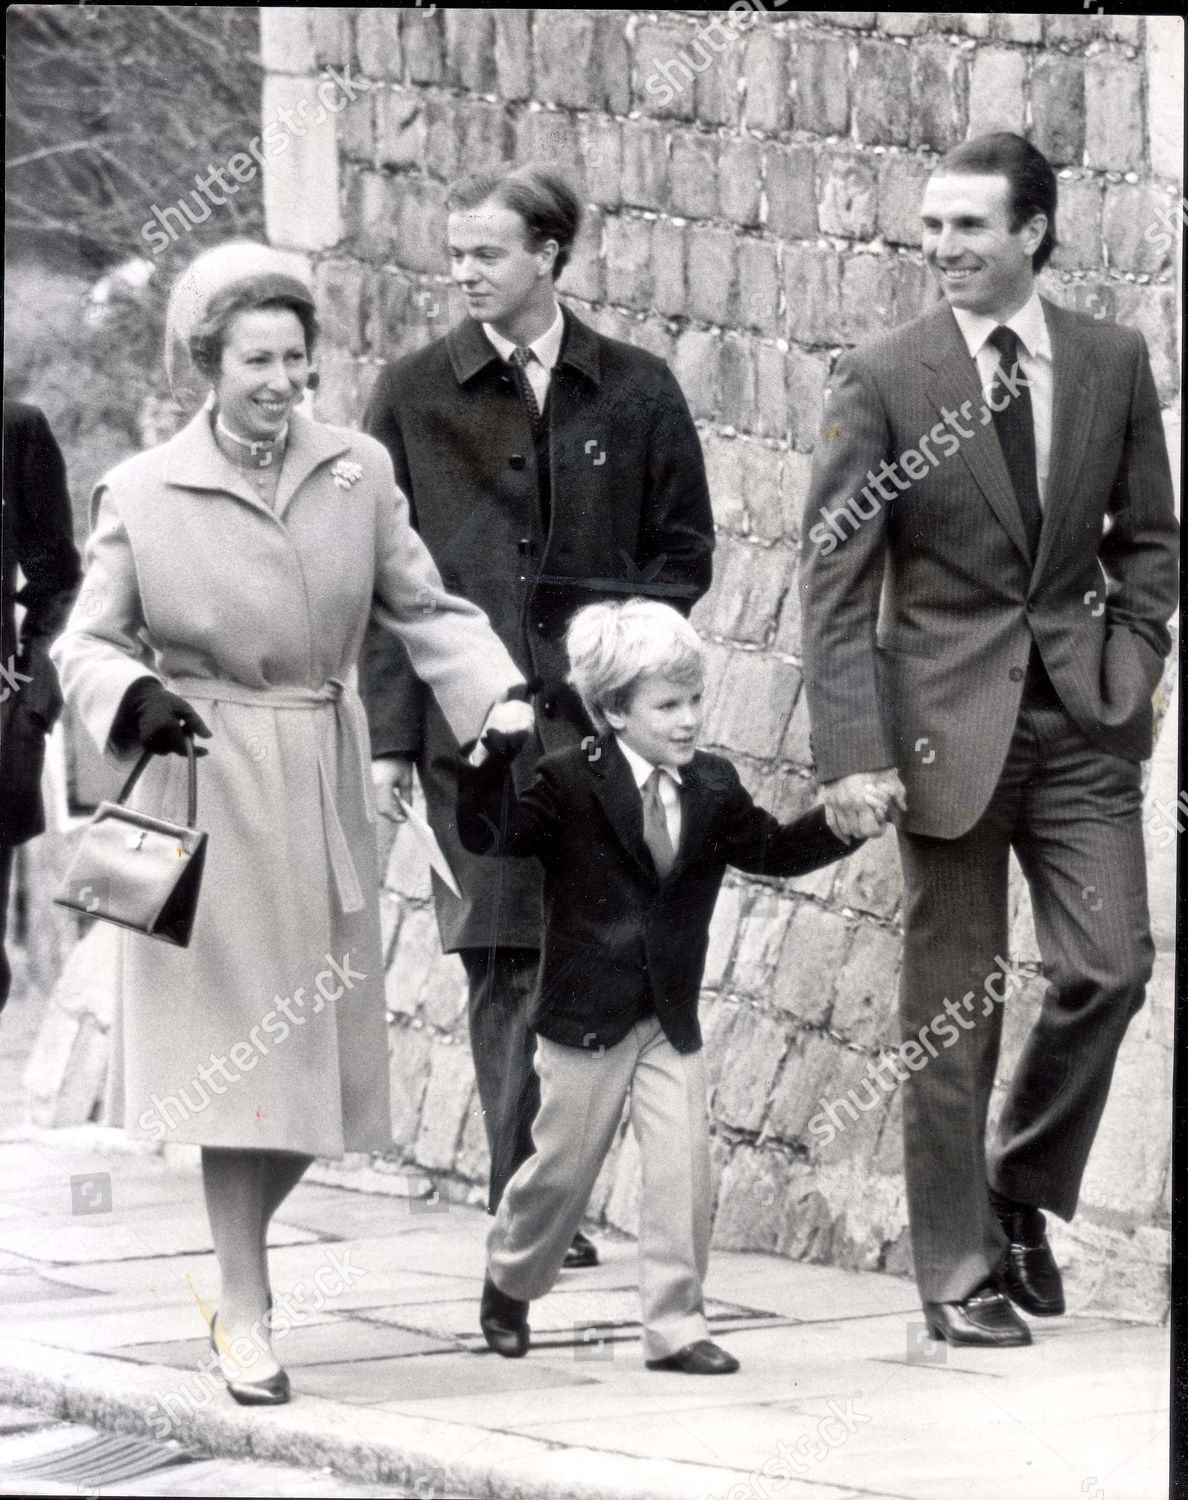 peter-phillips-december-1983-the-royal-family-attend-st-georges-chapel-at-windsor-castle-on-christmas-day-morning-our-pictures-show-captain-mark-phillips-with-his-son-peter-phillips-and-princess-anne-shutterstock-editorial-1044143a.jpg